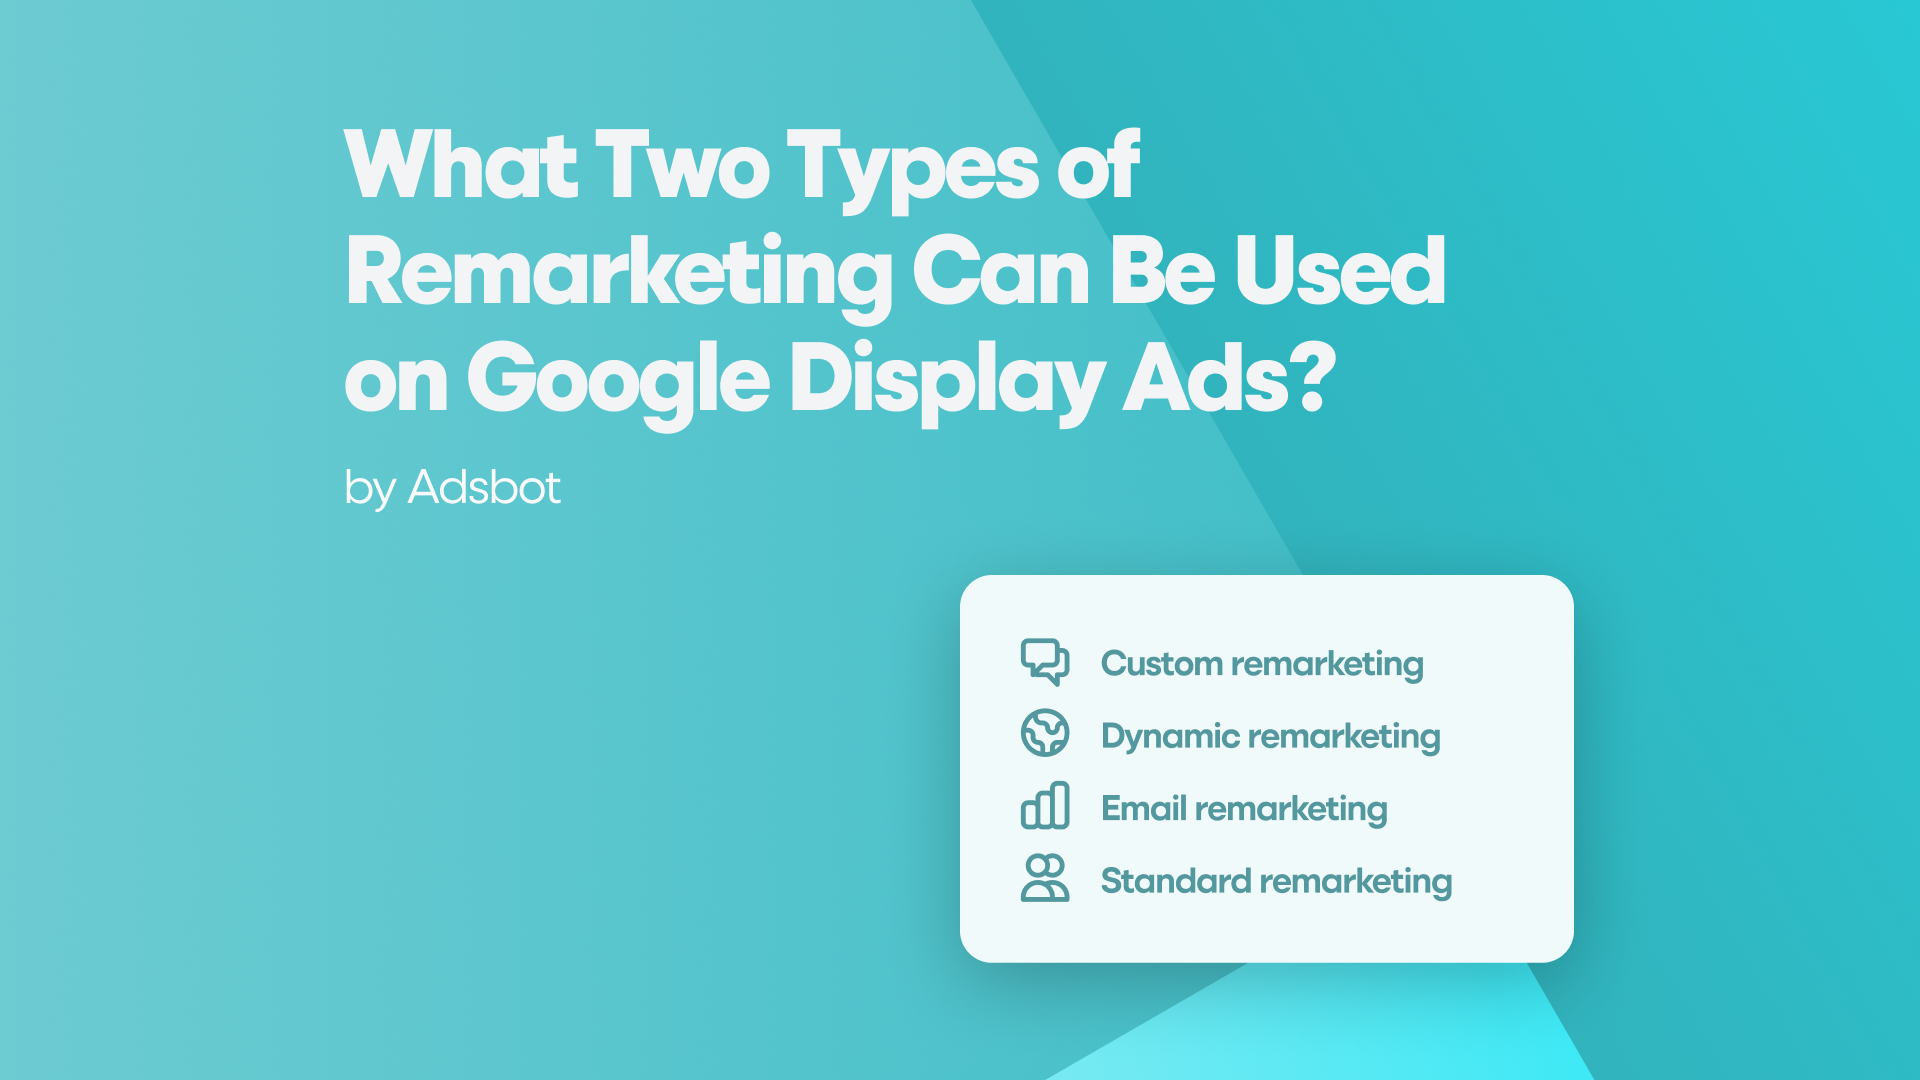 What Two Types of Remarketing Can Be Used on Google Display Ads?